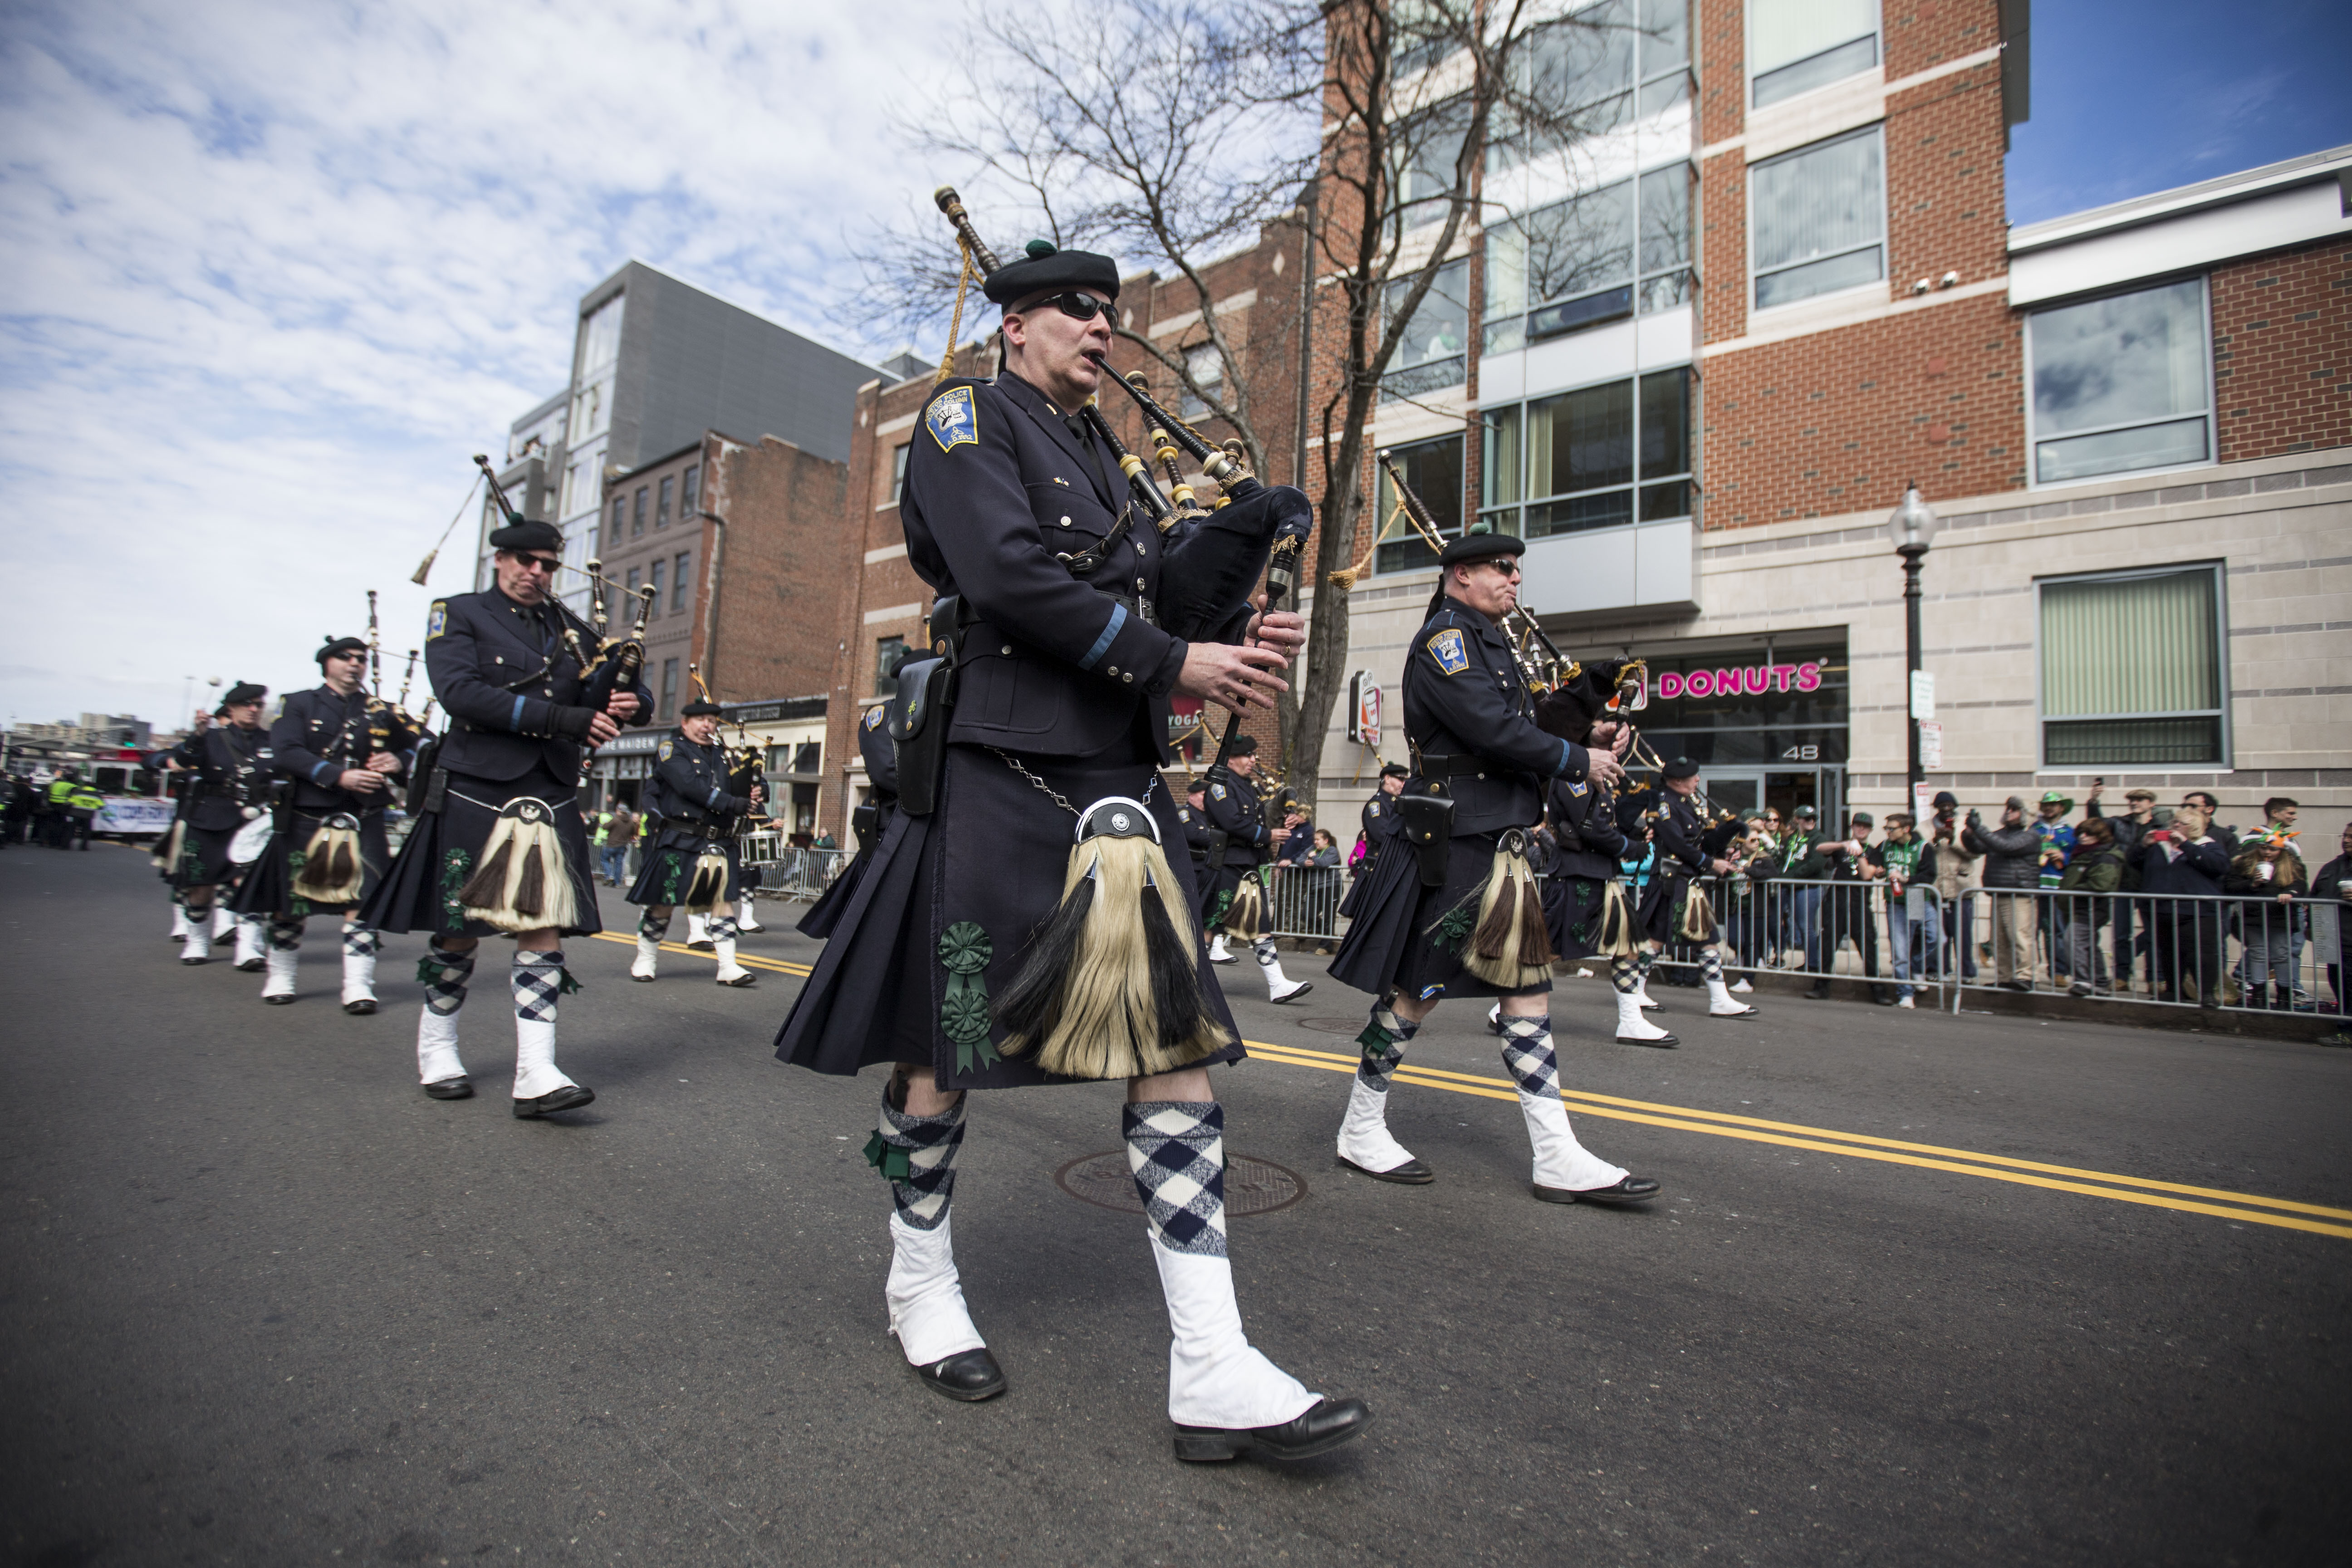 BOSTON, MA - MARCH 20: The Boston Police Gaelic Column of Pipes and Drums marches during the annual South Boston St. Patrick's Parade (Photo by Scott Eisen/Getty Images)